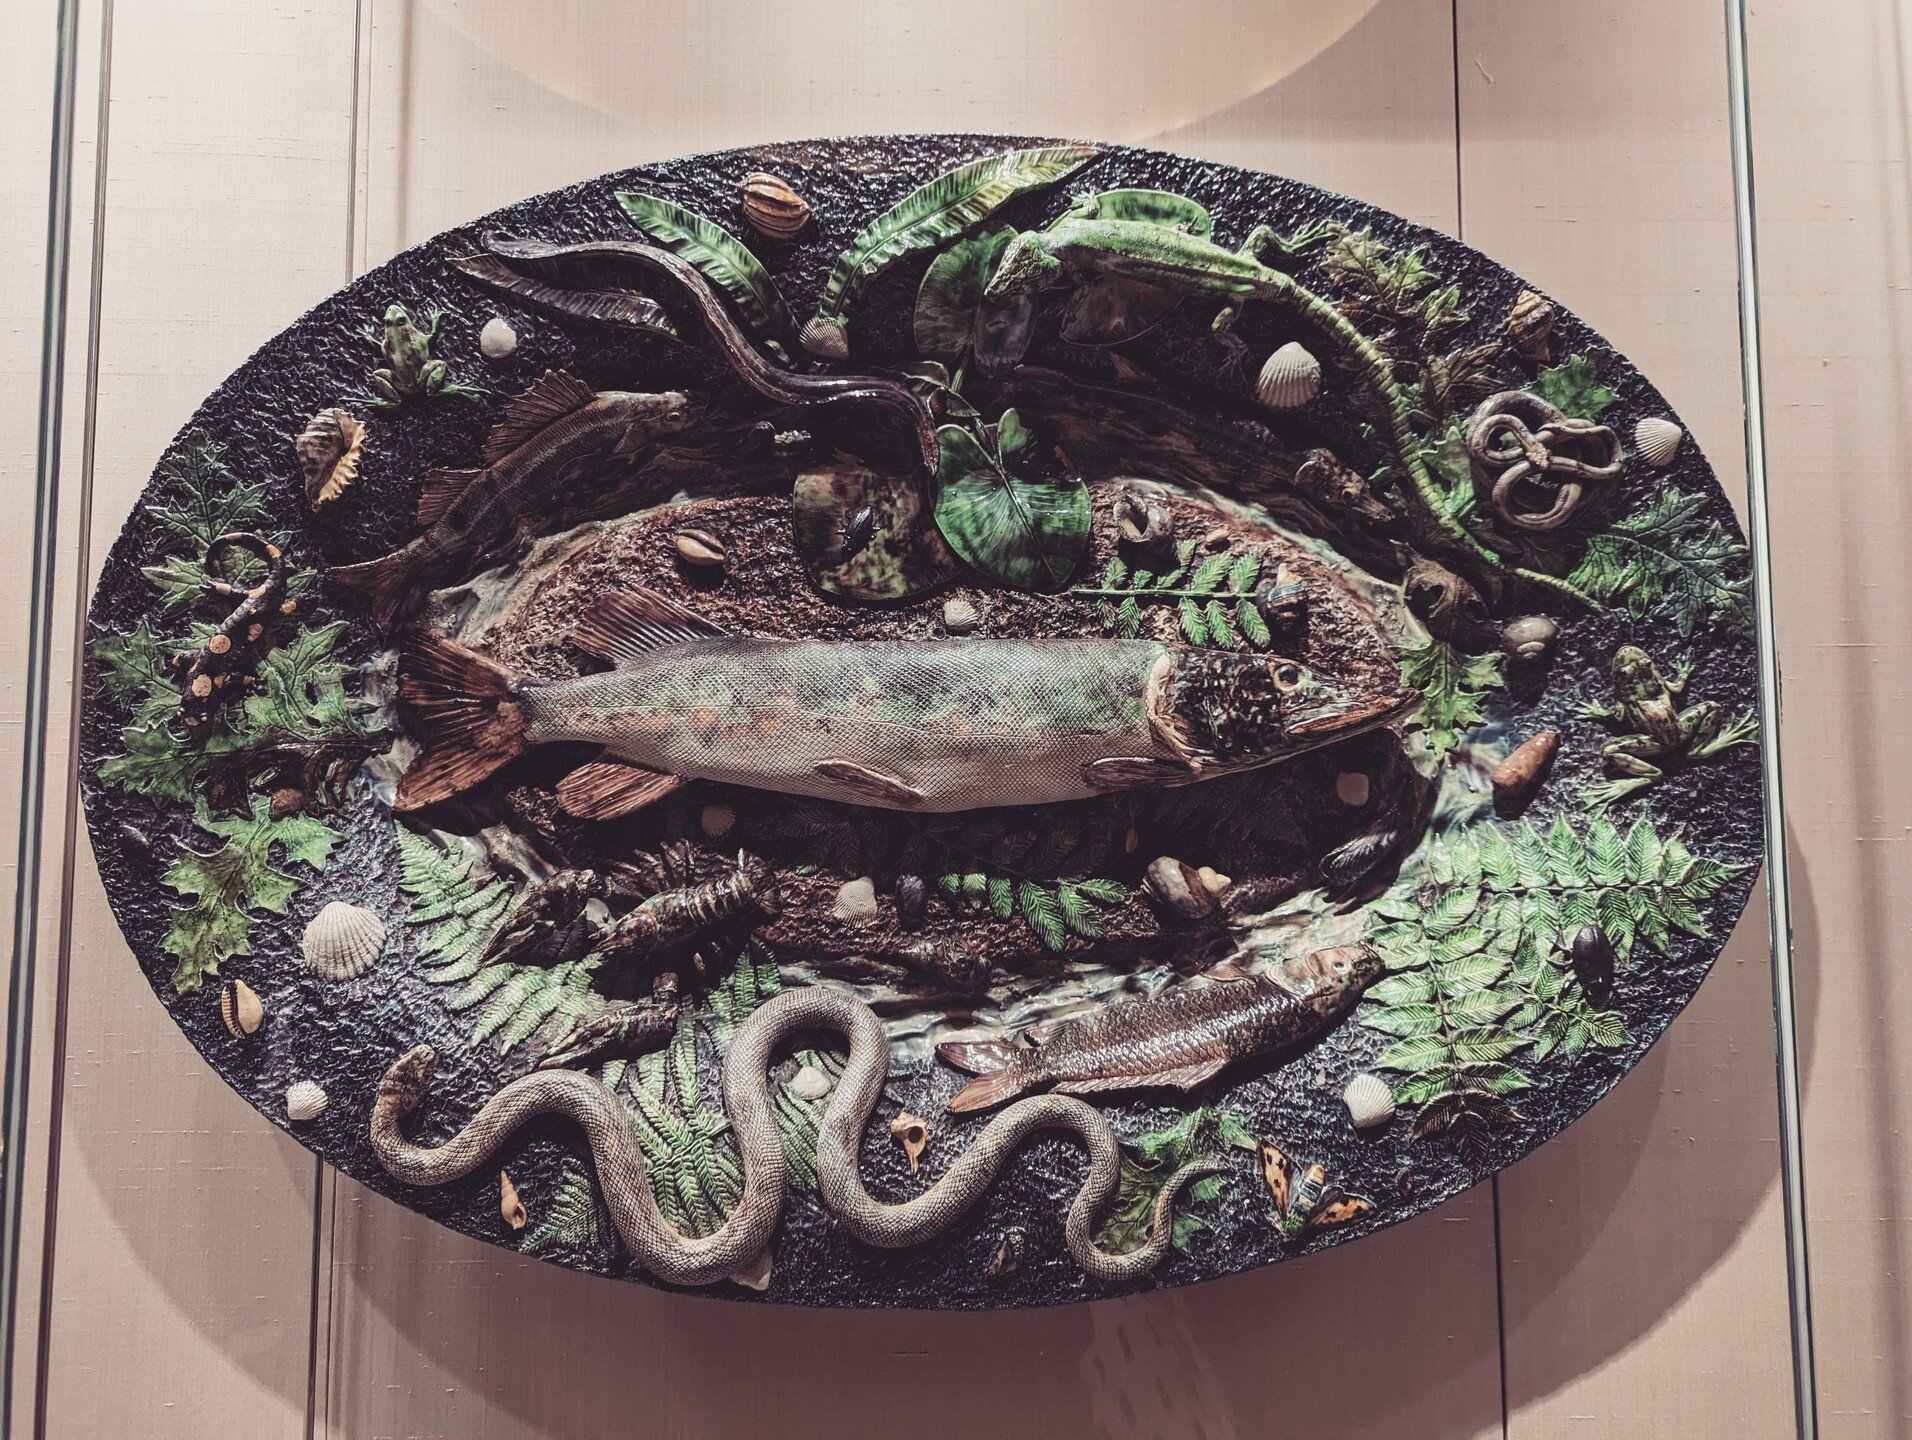 Jewish or not? What is it?

If there's any specialty we have here at Ashreynu, it's seeing everything through a Jewish lens. This fish plate (technically named &quot;Large Platter with Fish&quot;) was spotted at the @metmuseum and we gave it plenty o